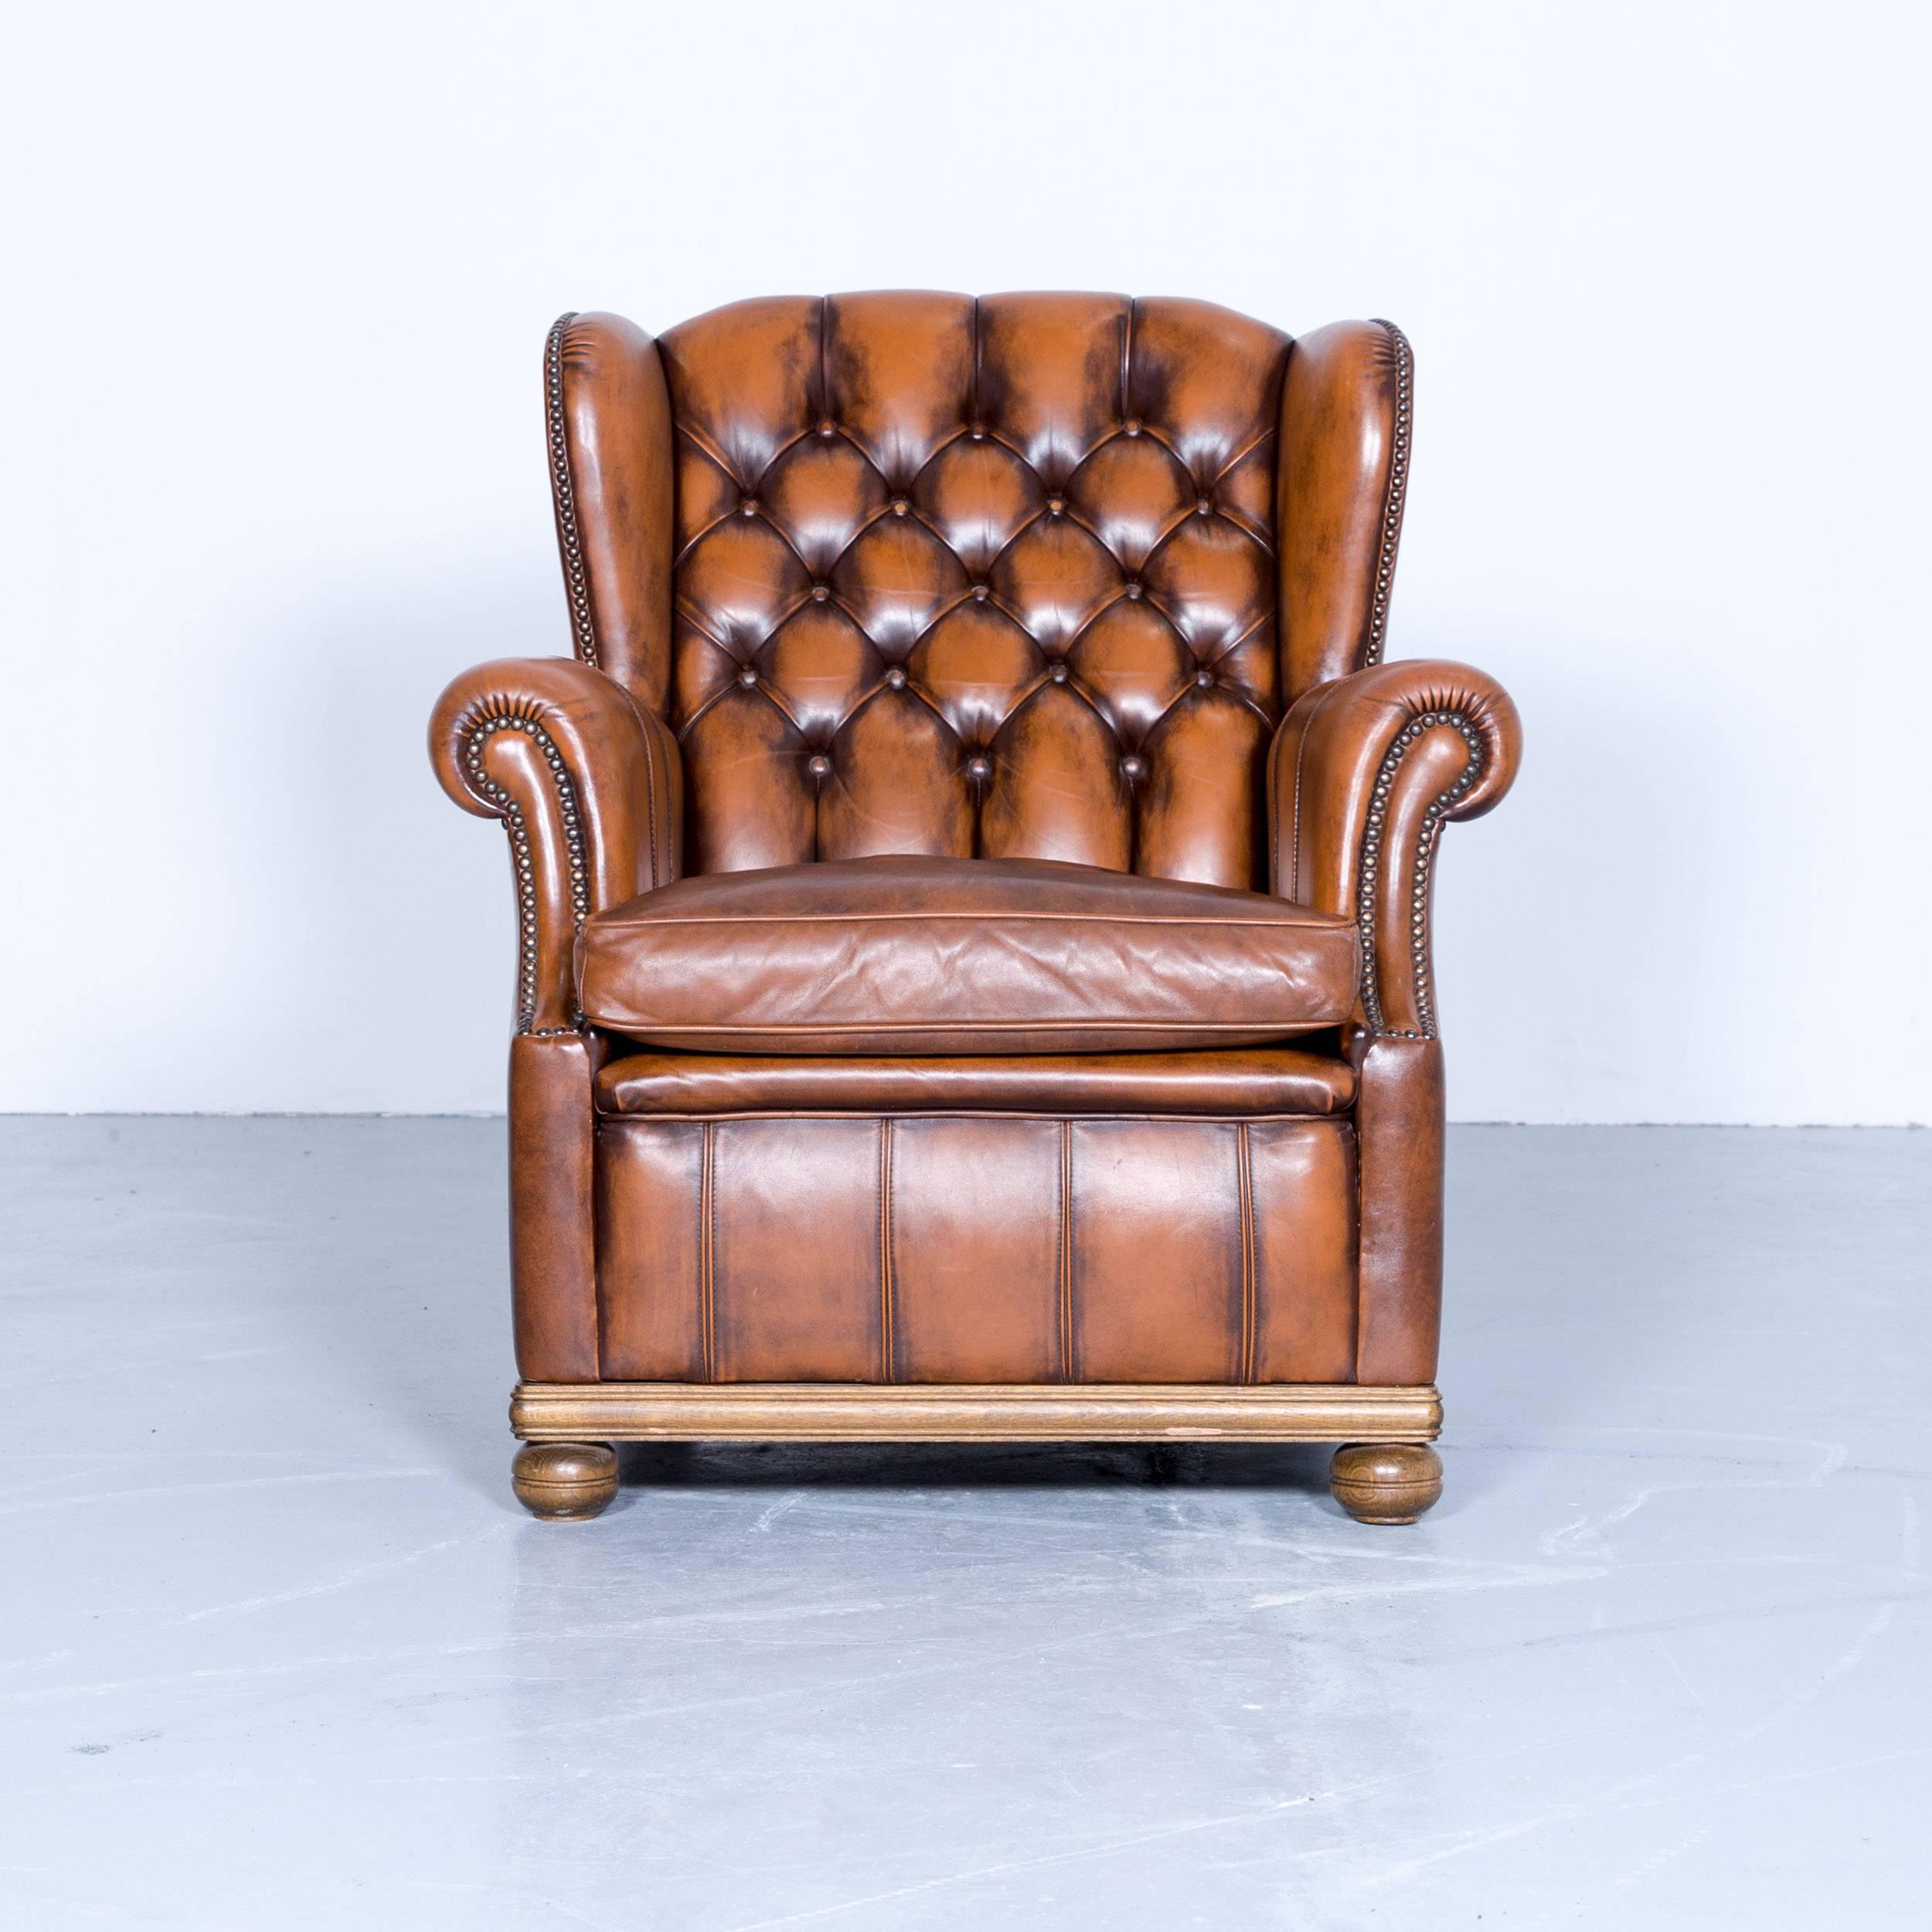 Brown colored Chesterfield leather armchair, in a vintage and elegant design, made for pure comfort and style.